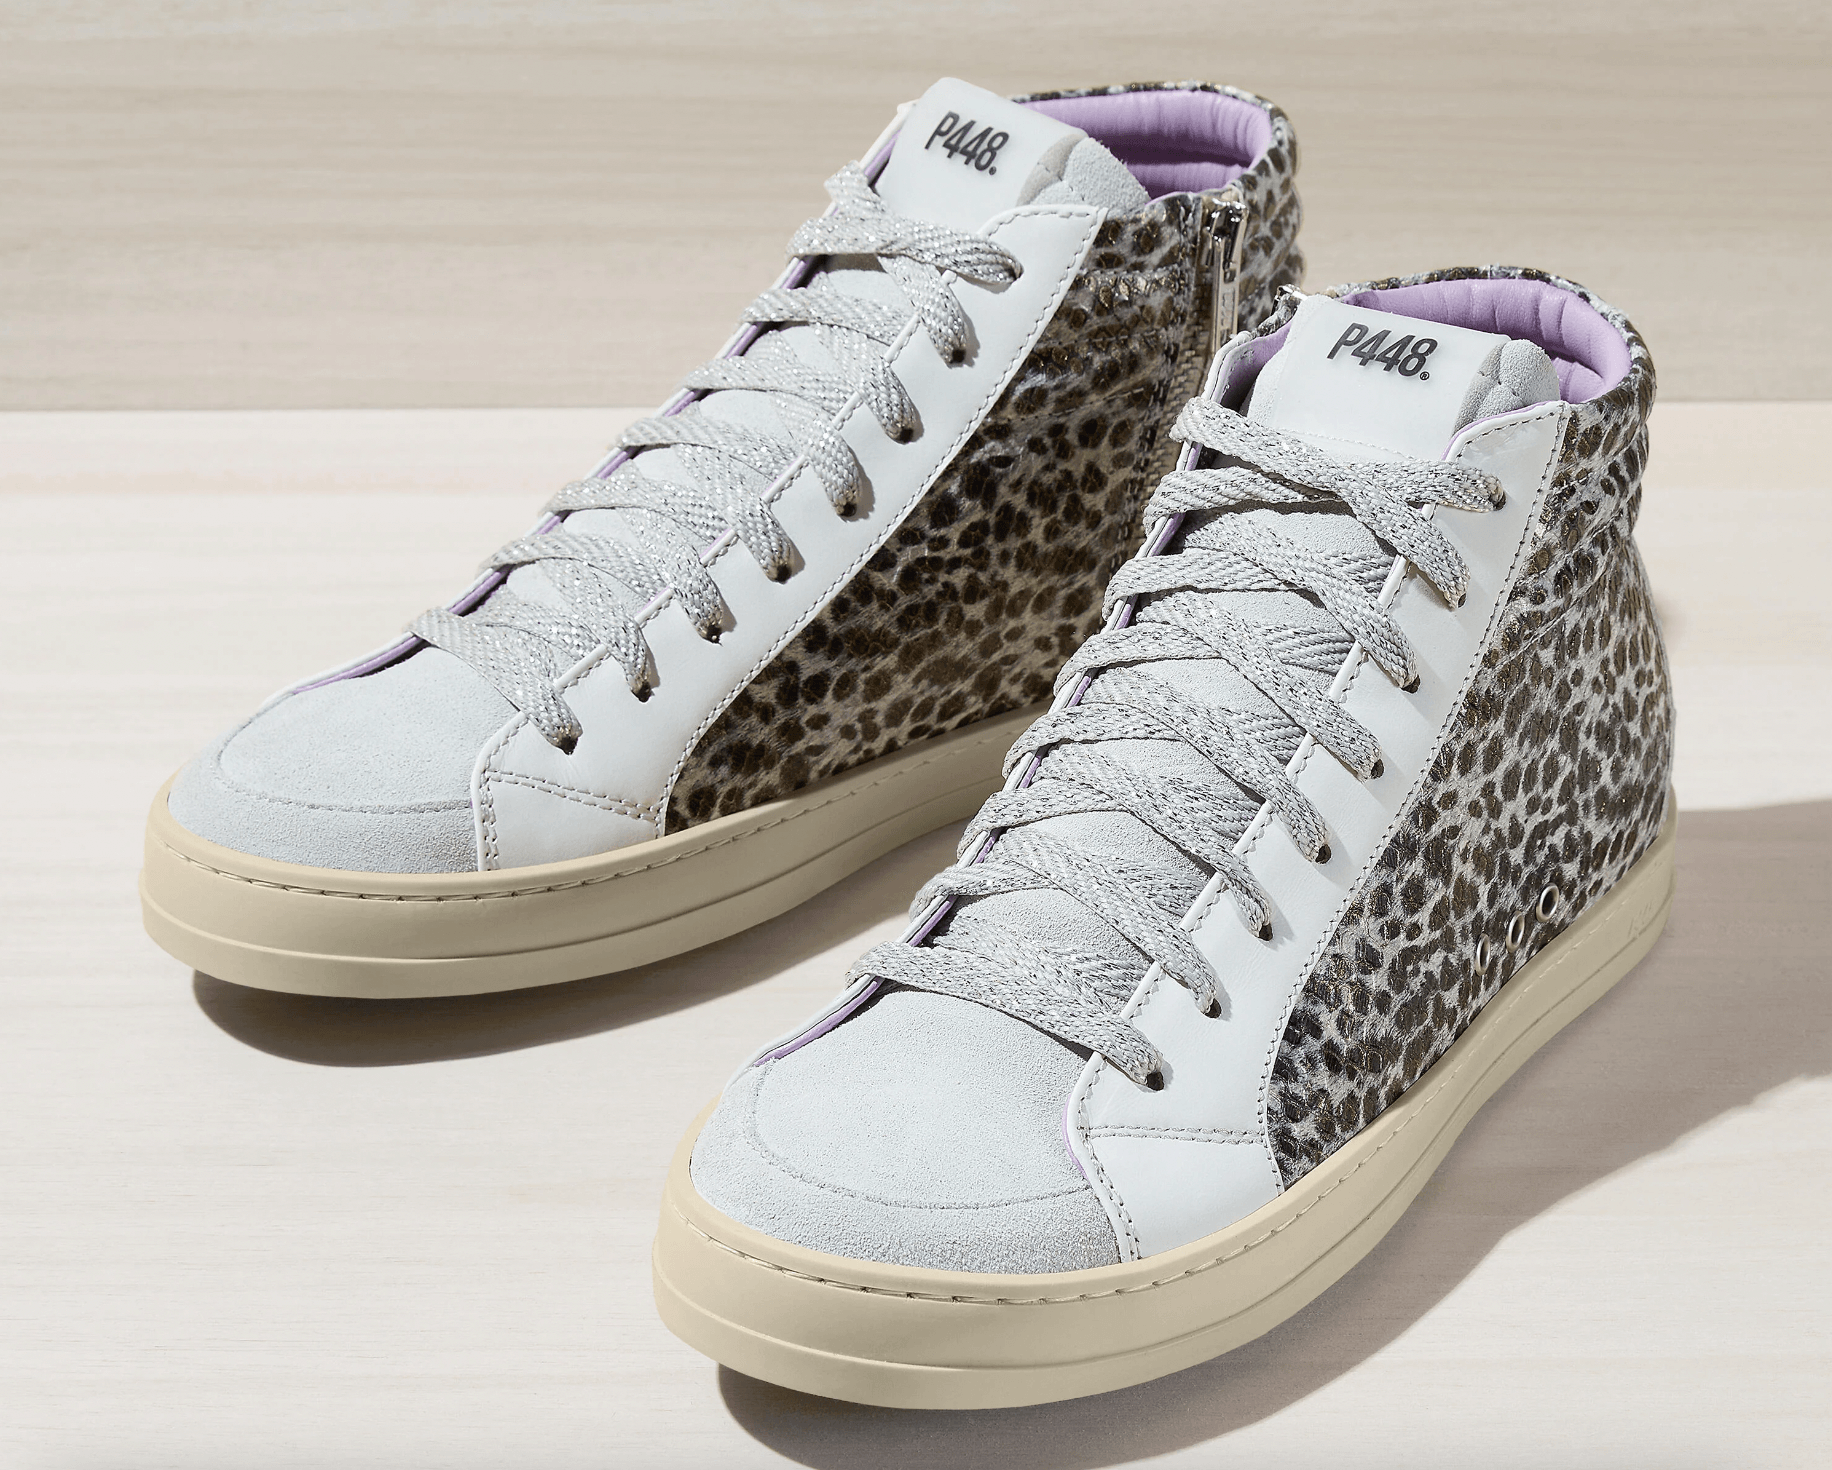 Skate Gold Leopard High Top Sneaker by P448 - Haven